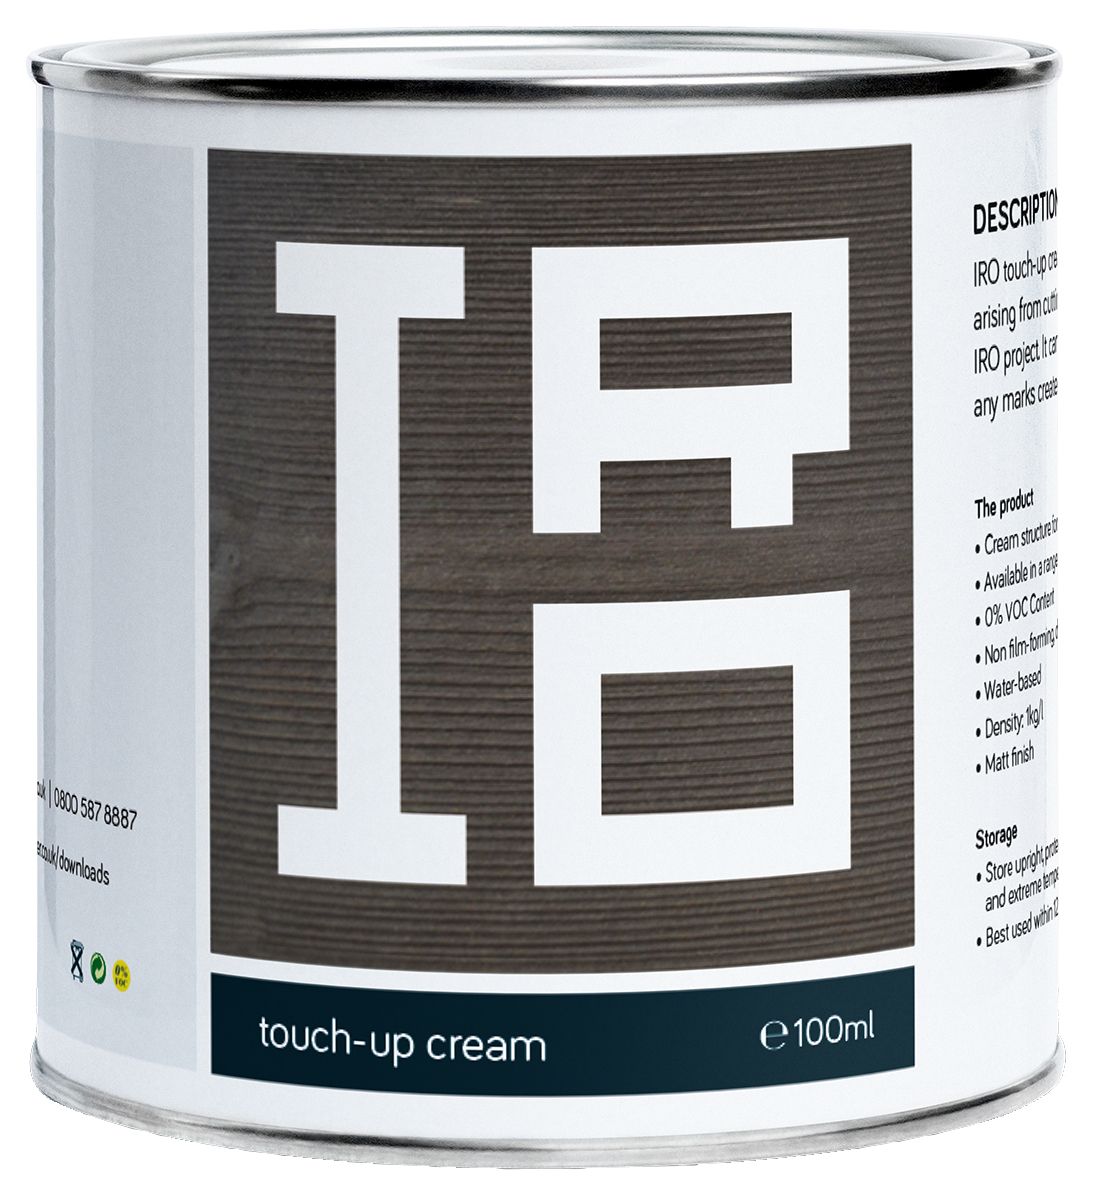 IRO Charcoal Black Protective Colour Touch Up Cream - 100ml